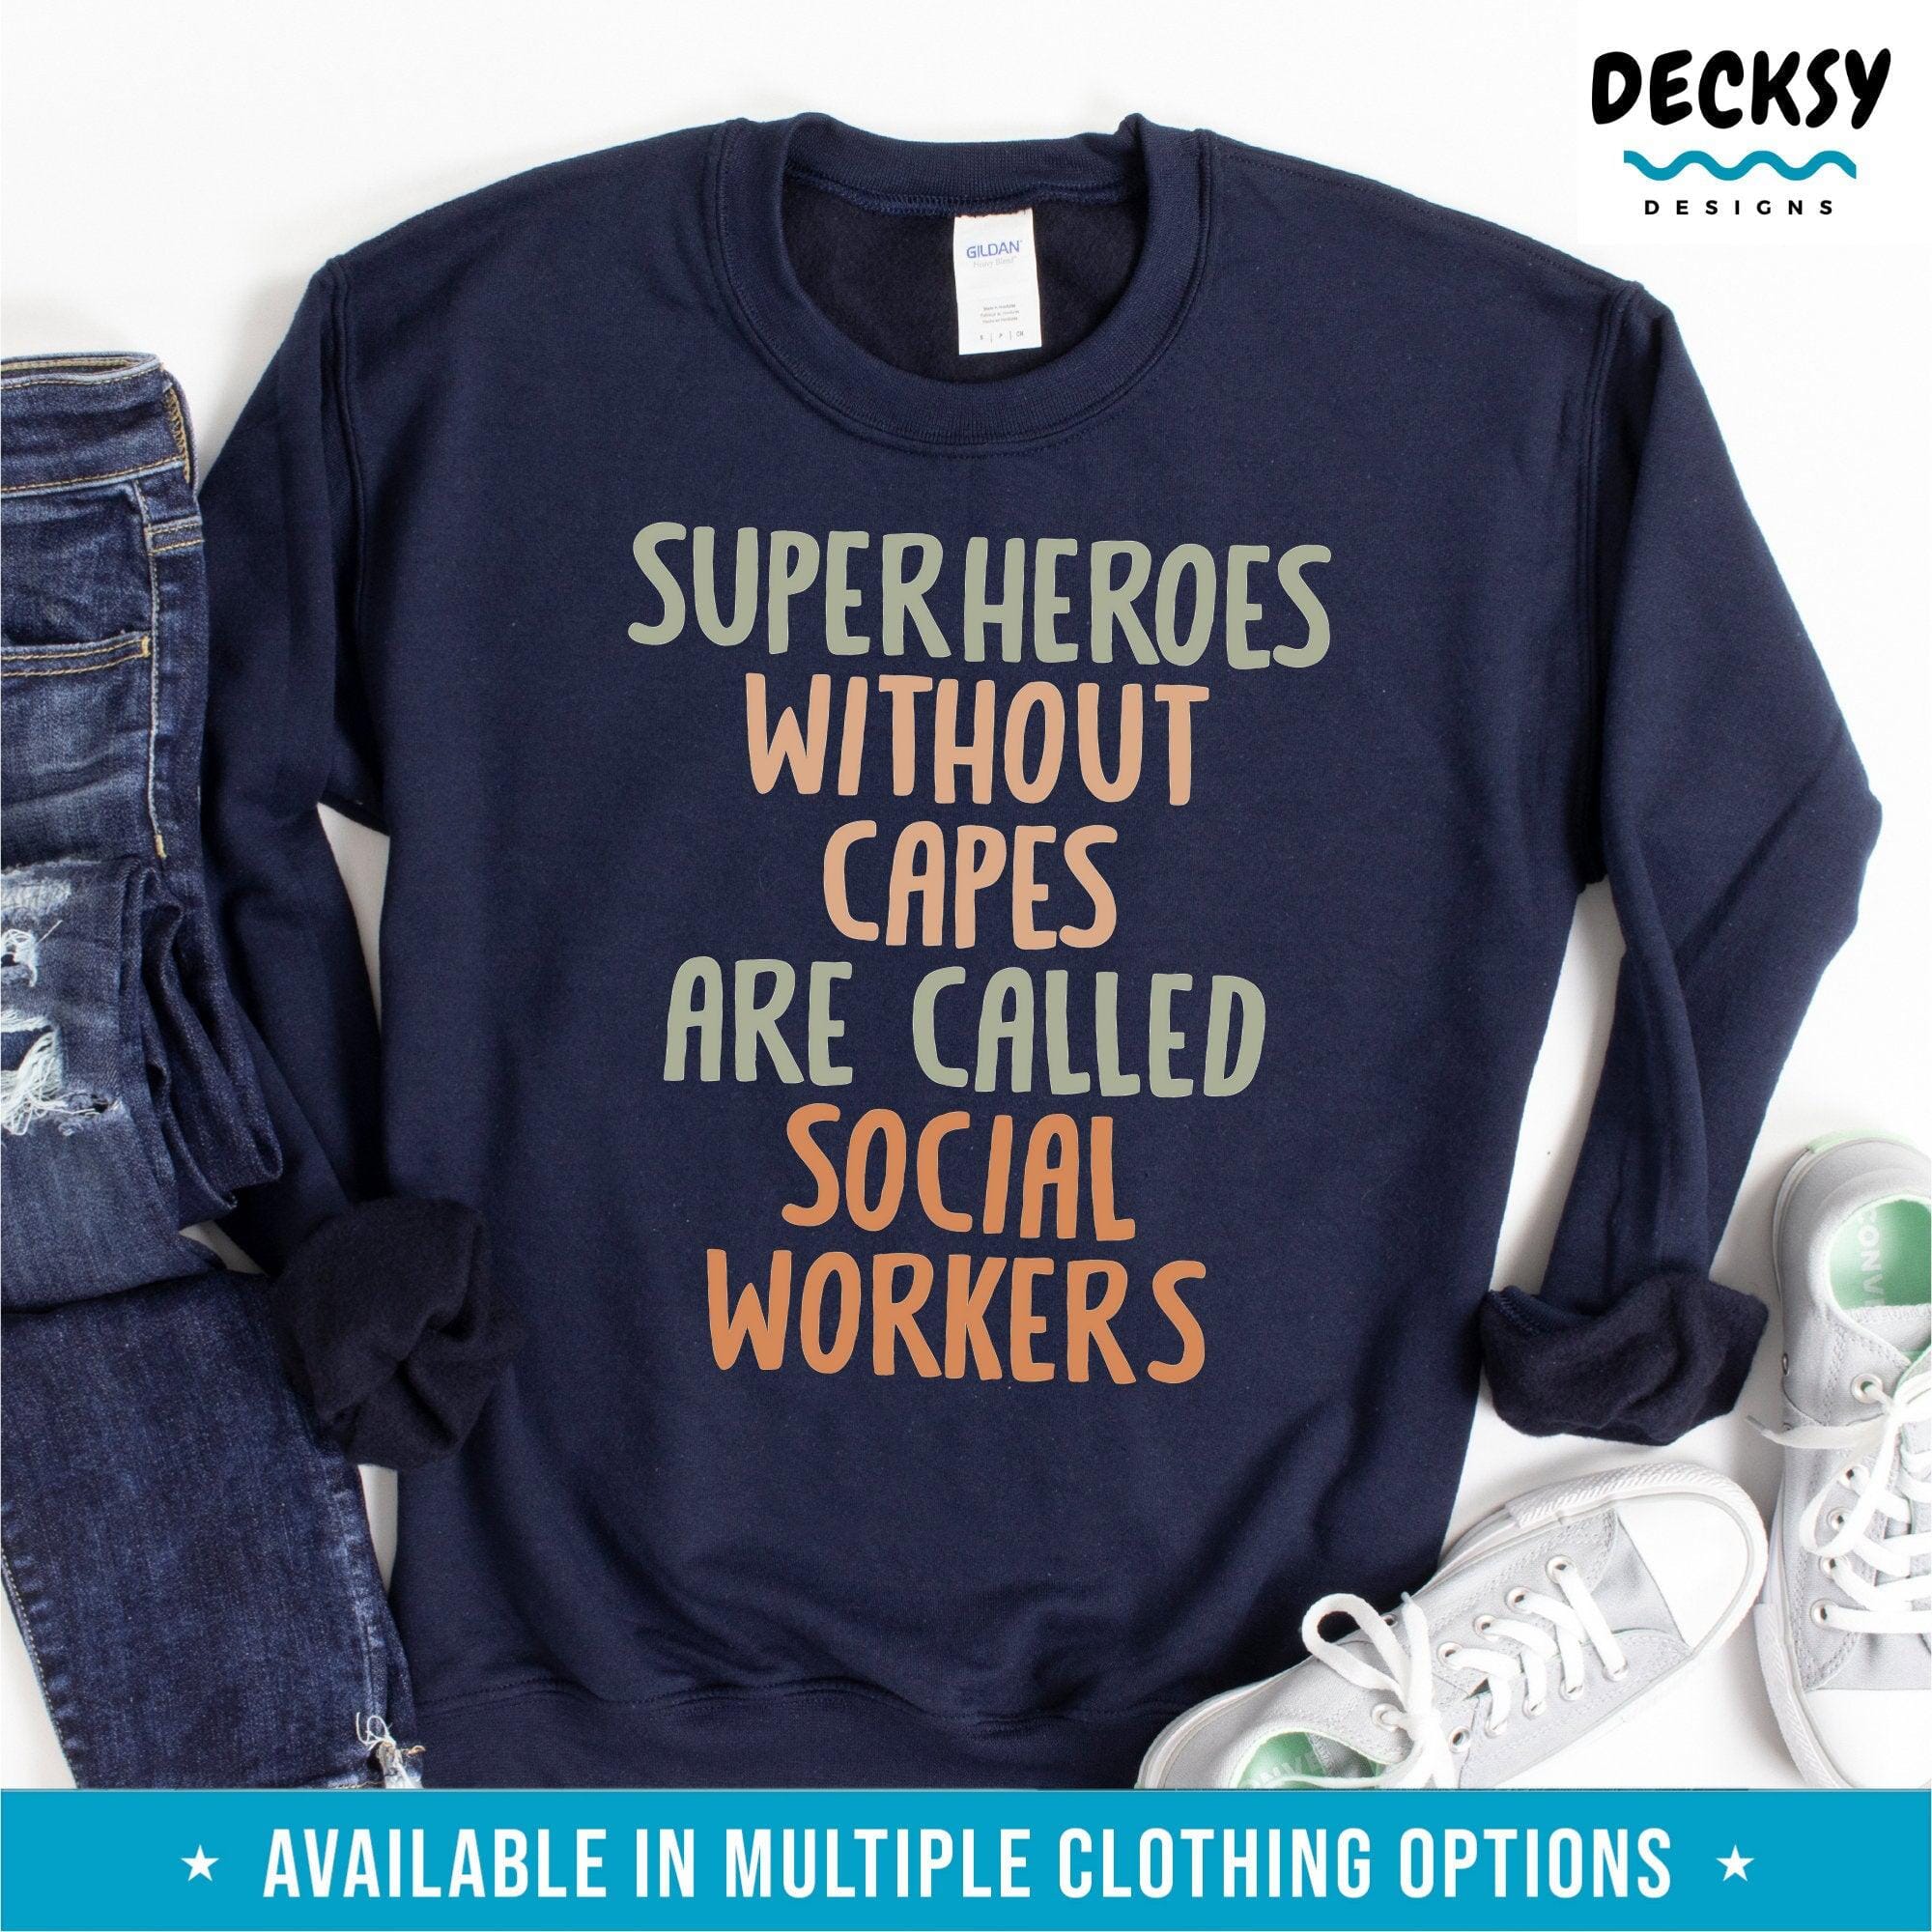 Social Worker Shirt, Gift For Social Work-Clothing:Gender-Neutral Adult Clothing:Tops & Tees:T-shirts:Graphic Tees-DecksyDesigns